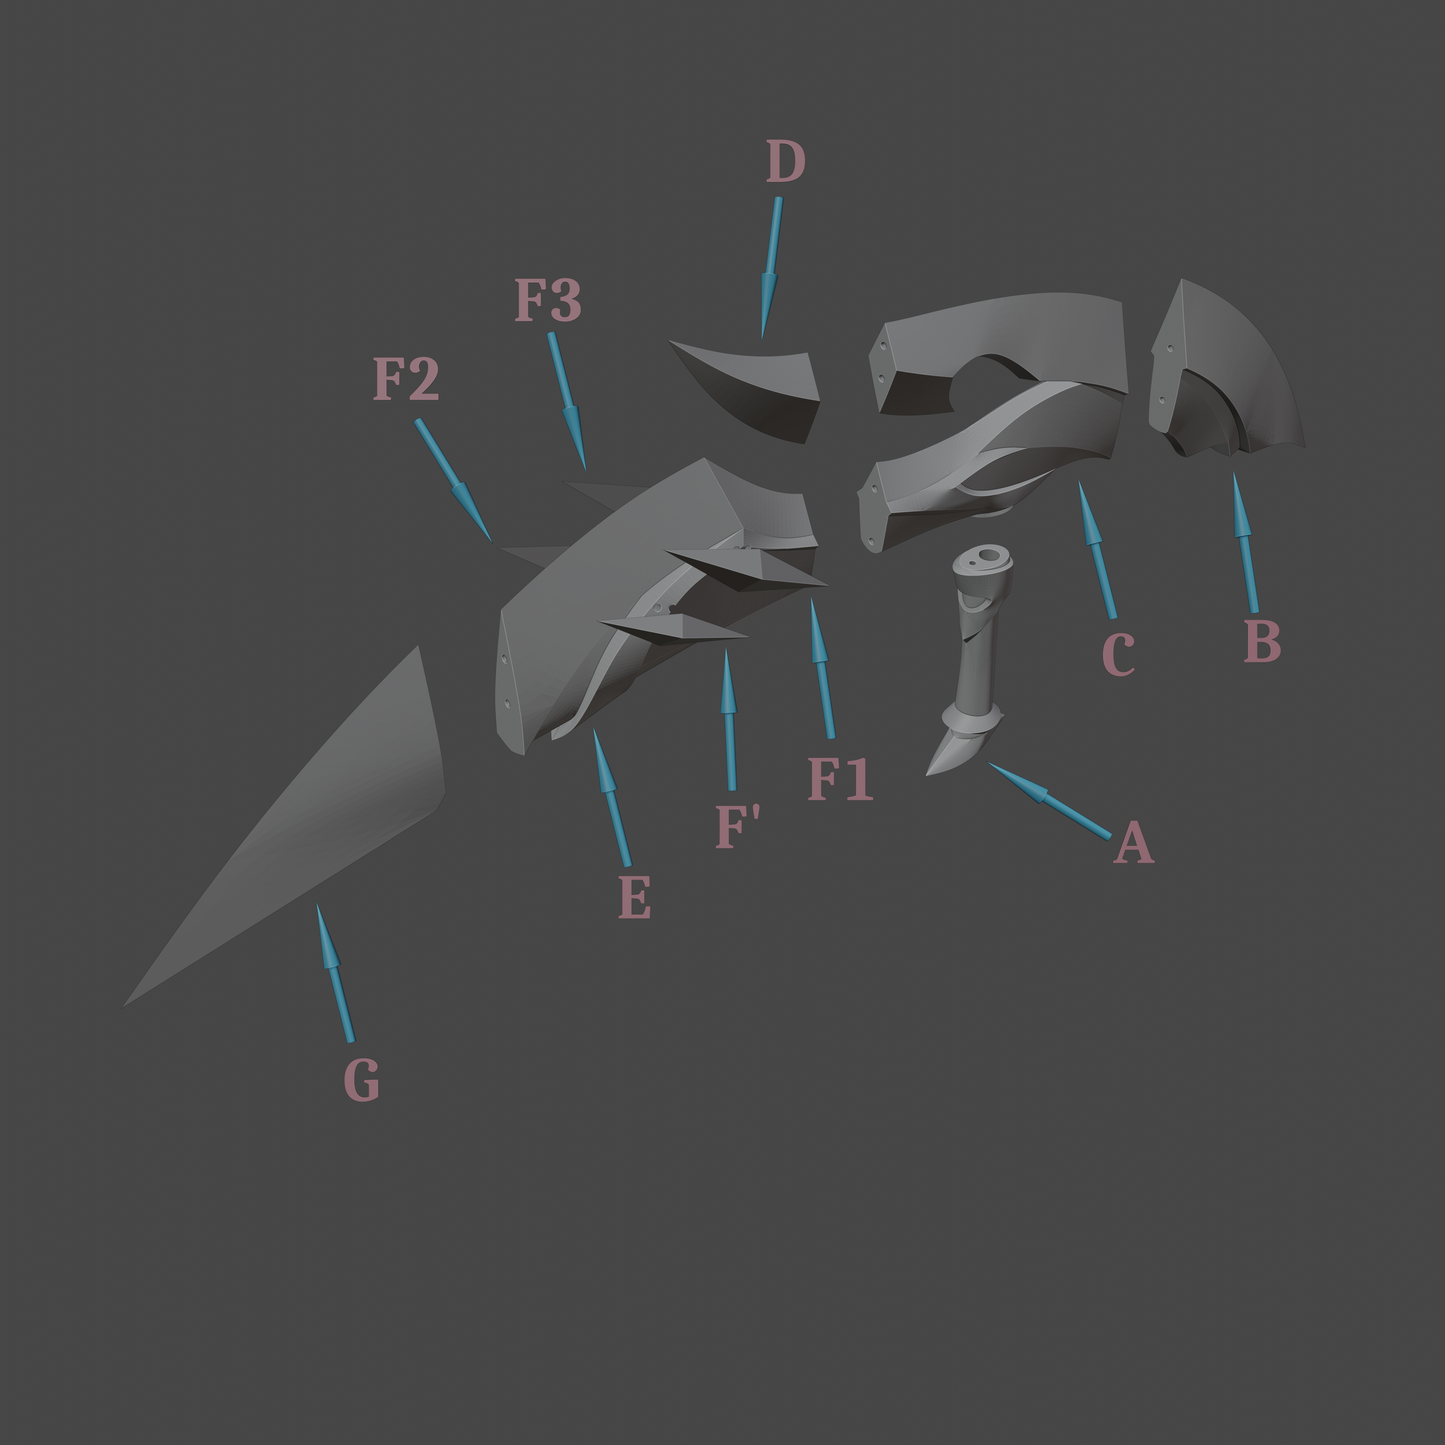 Fatui Pyro Agent Sacrificial Knife - Digital 3D Model Files and Physical 3D Printed Kit Options - Fatui Pyro Agent Cosplay